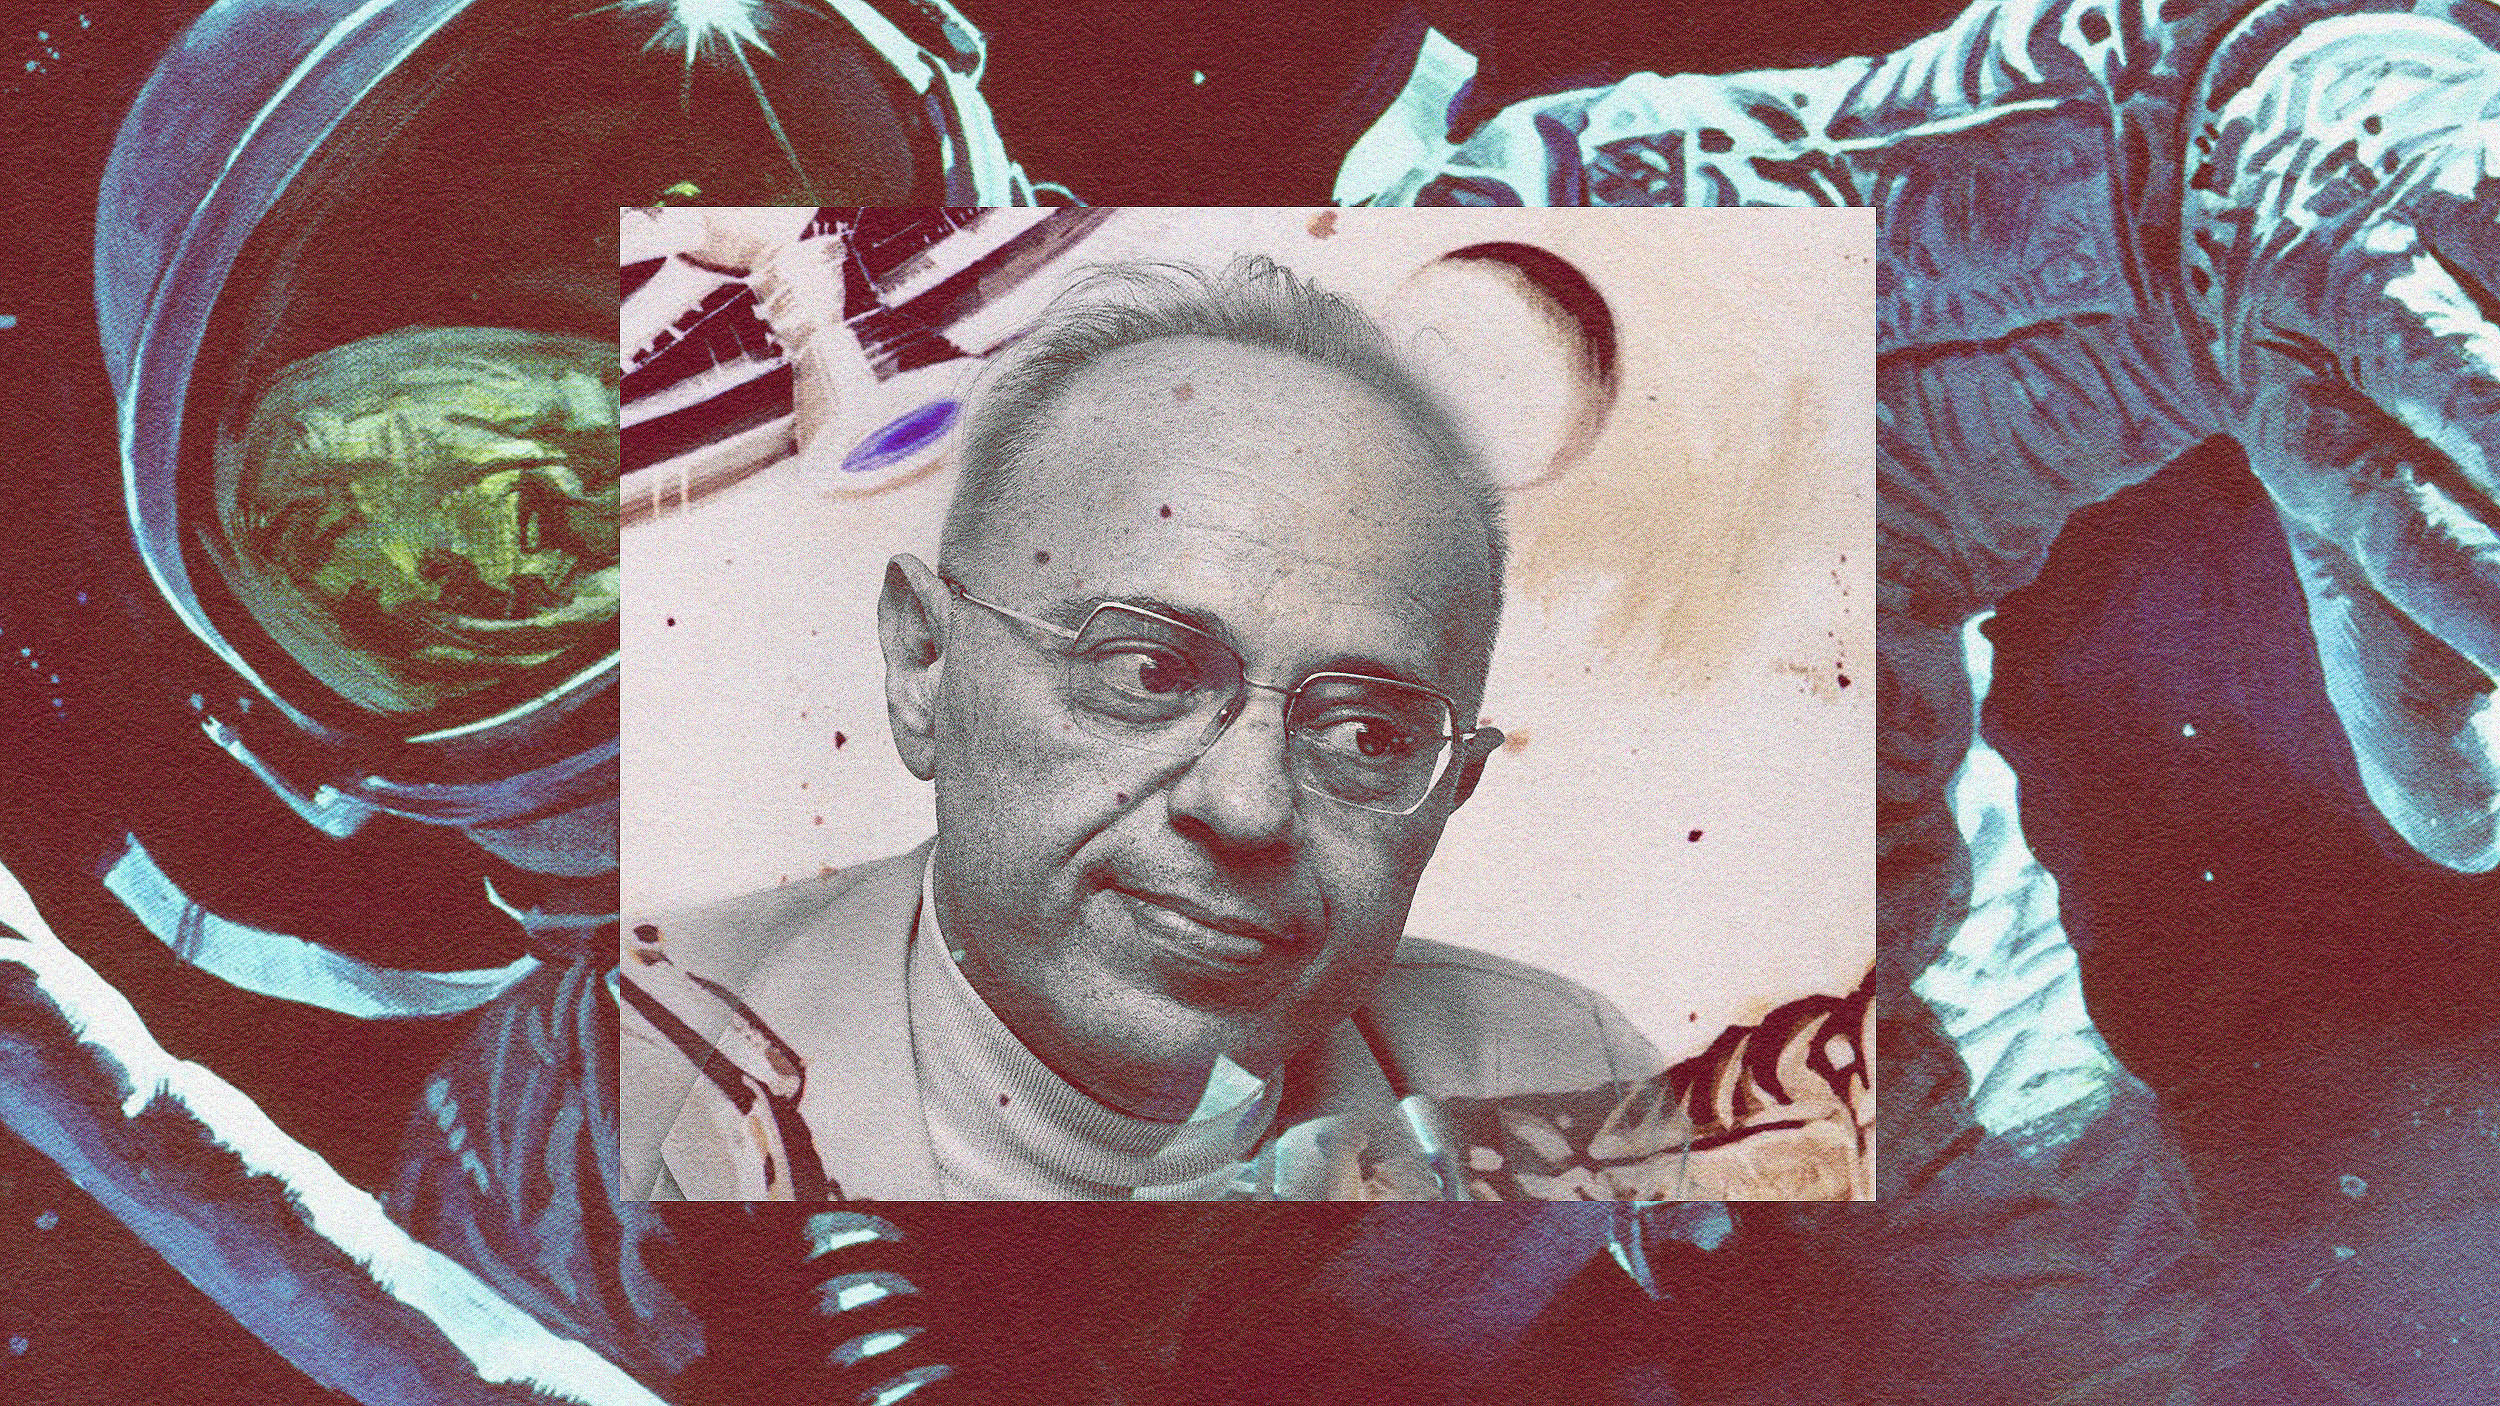 Vintage portrait of a man, embodying the philosophy of AI, superimposed on an abstract cosmic background.